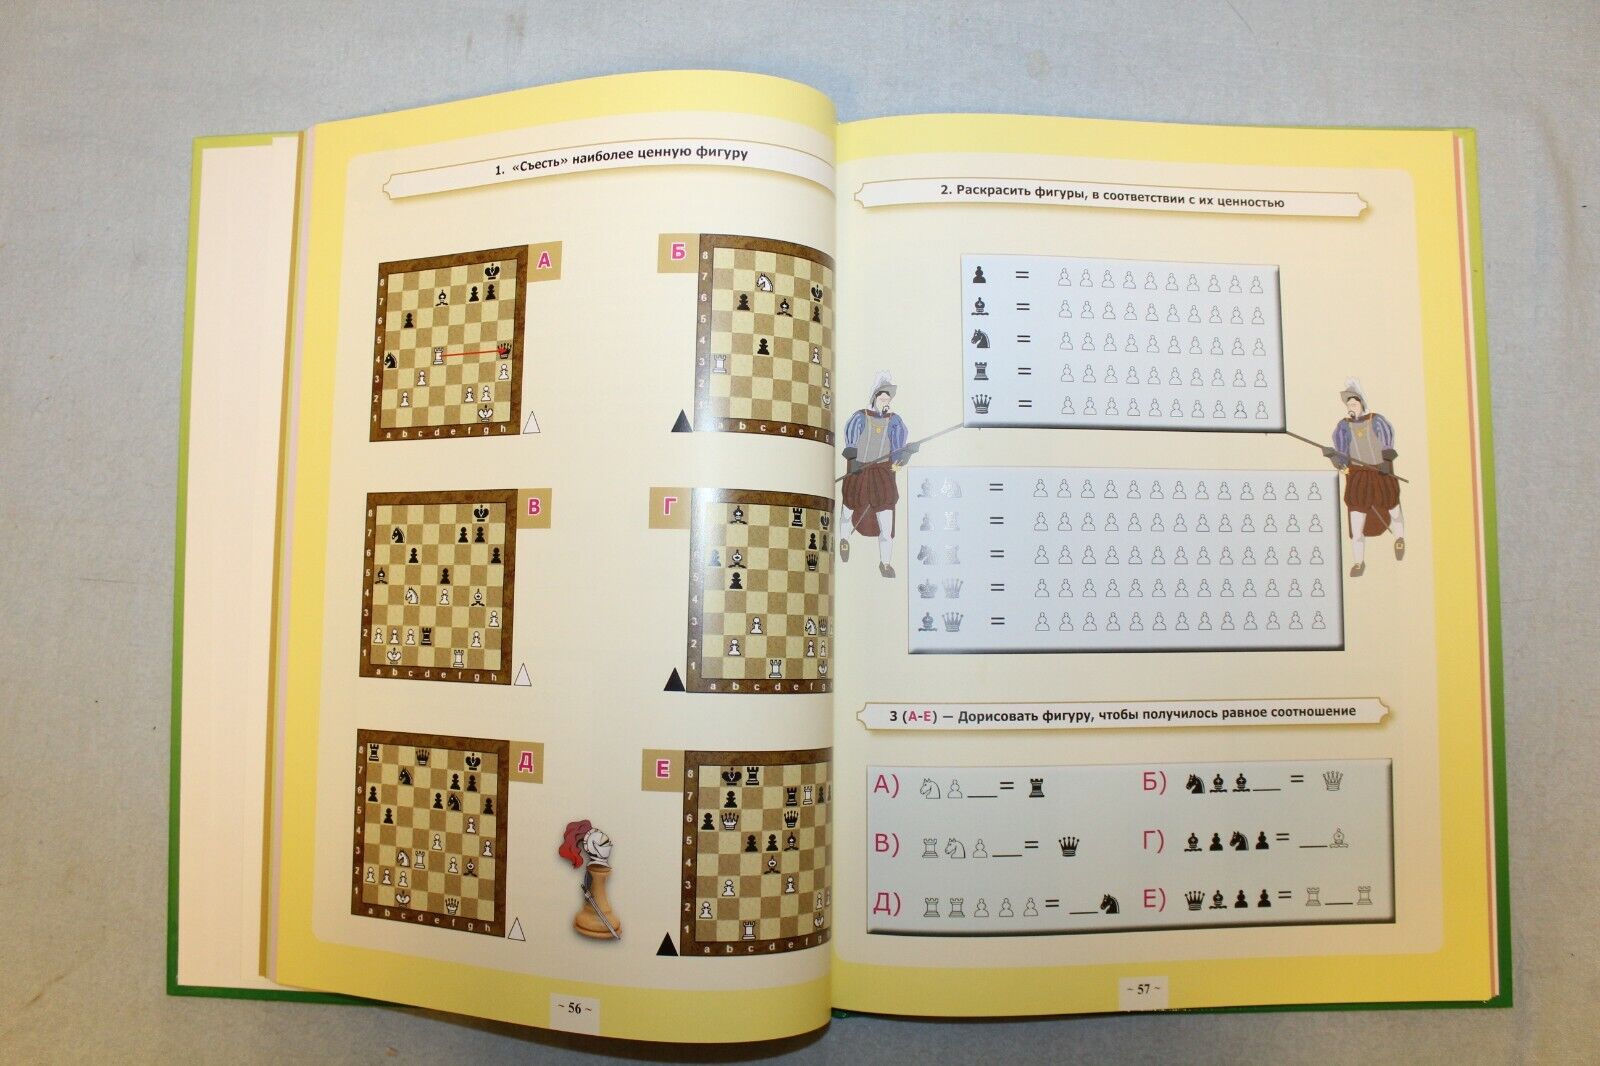 10704.2 Vol. Karpov's Colorf Chess Tutorial. Kids Children. Very large! Coated paper